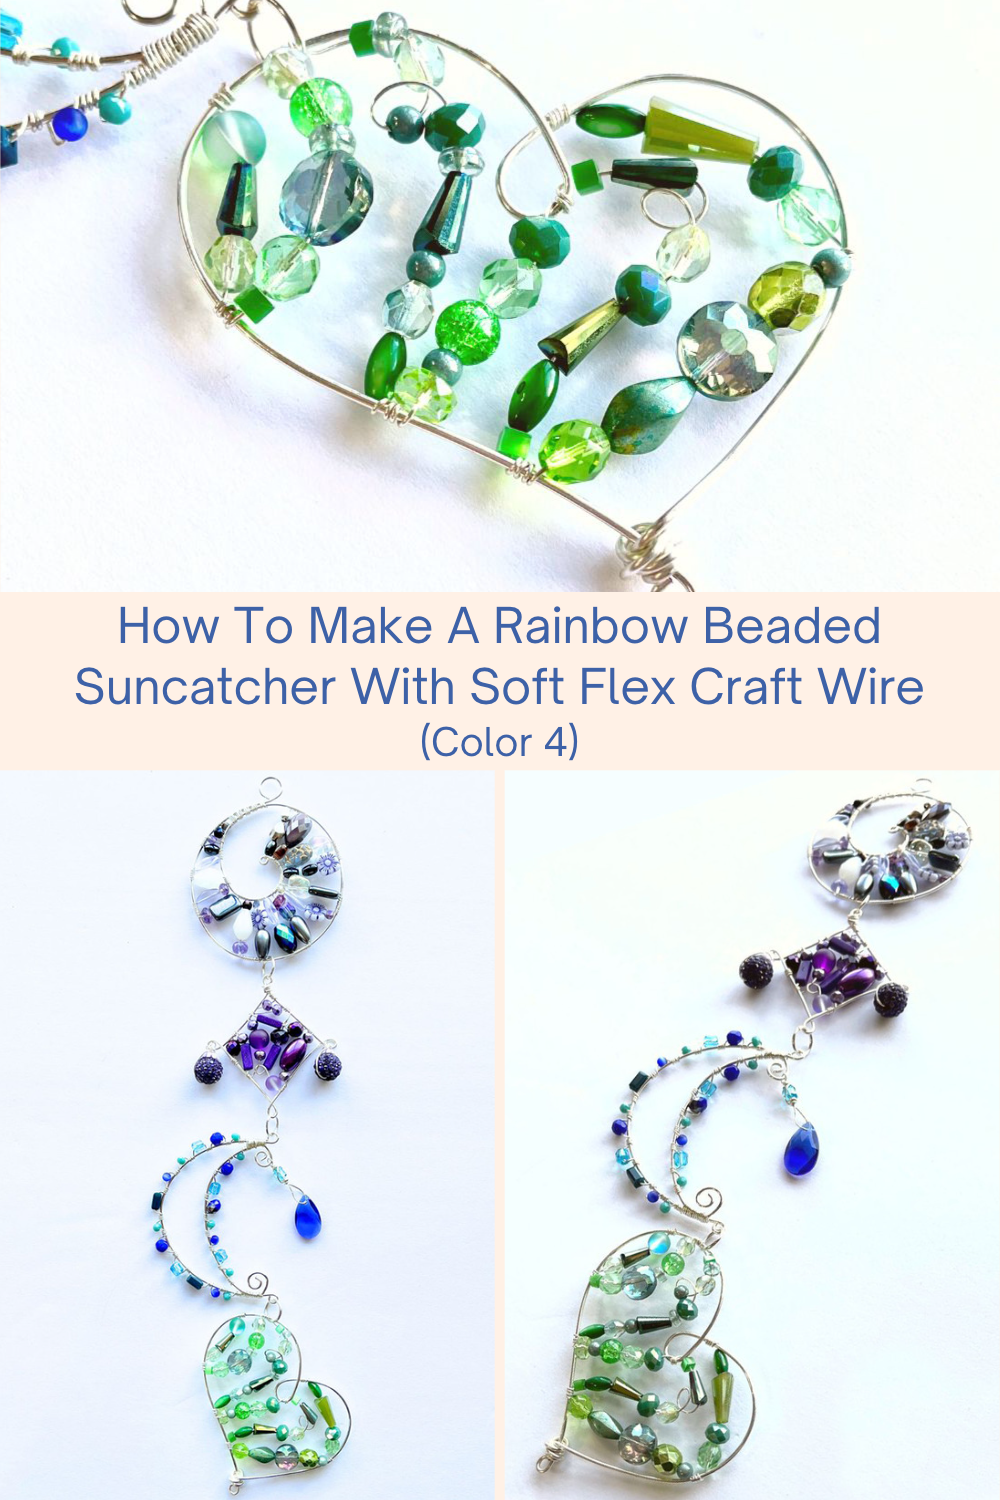 How To Make A Rainbow Beaded Suncatcher With Soft Flex Craft Wire (Color 4) Collage